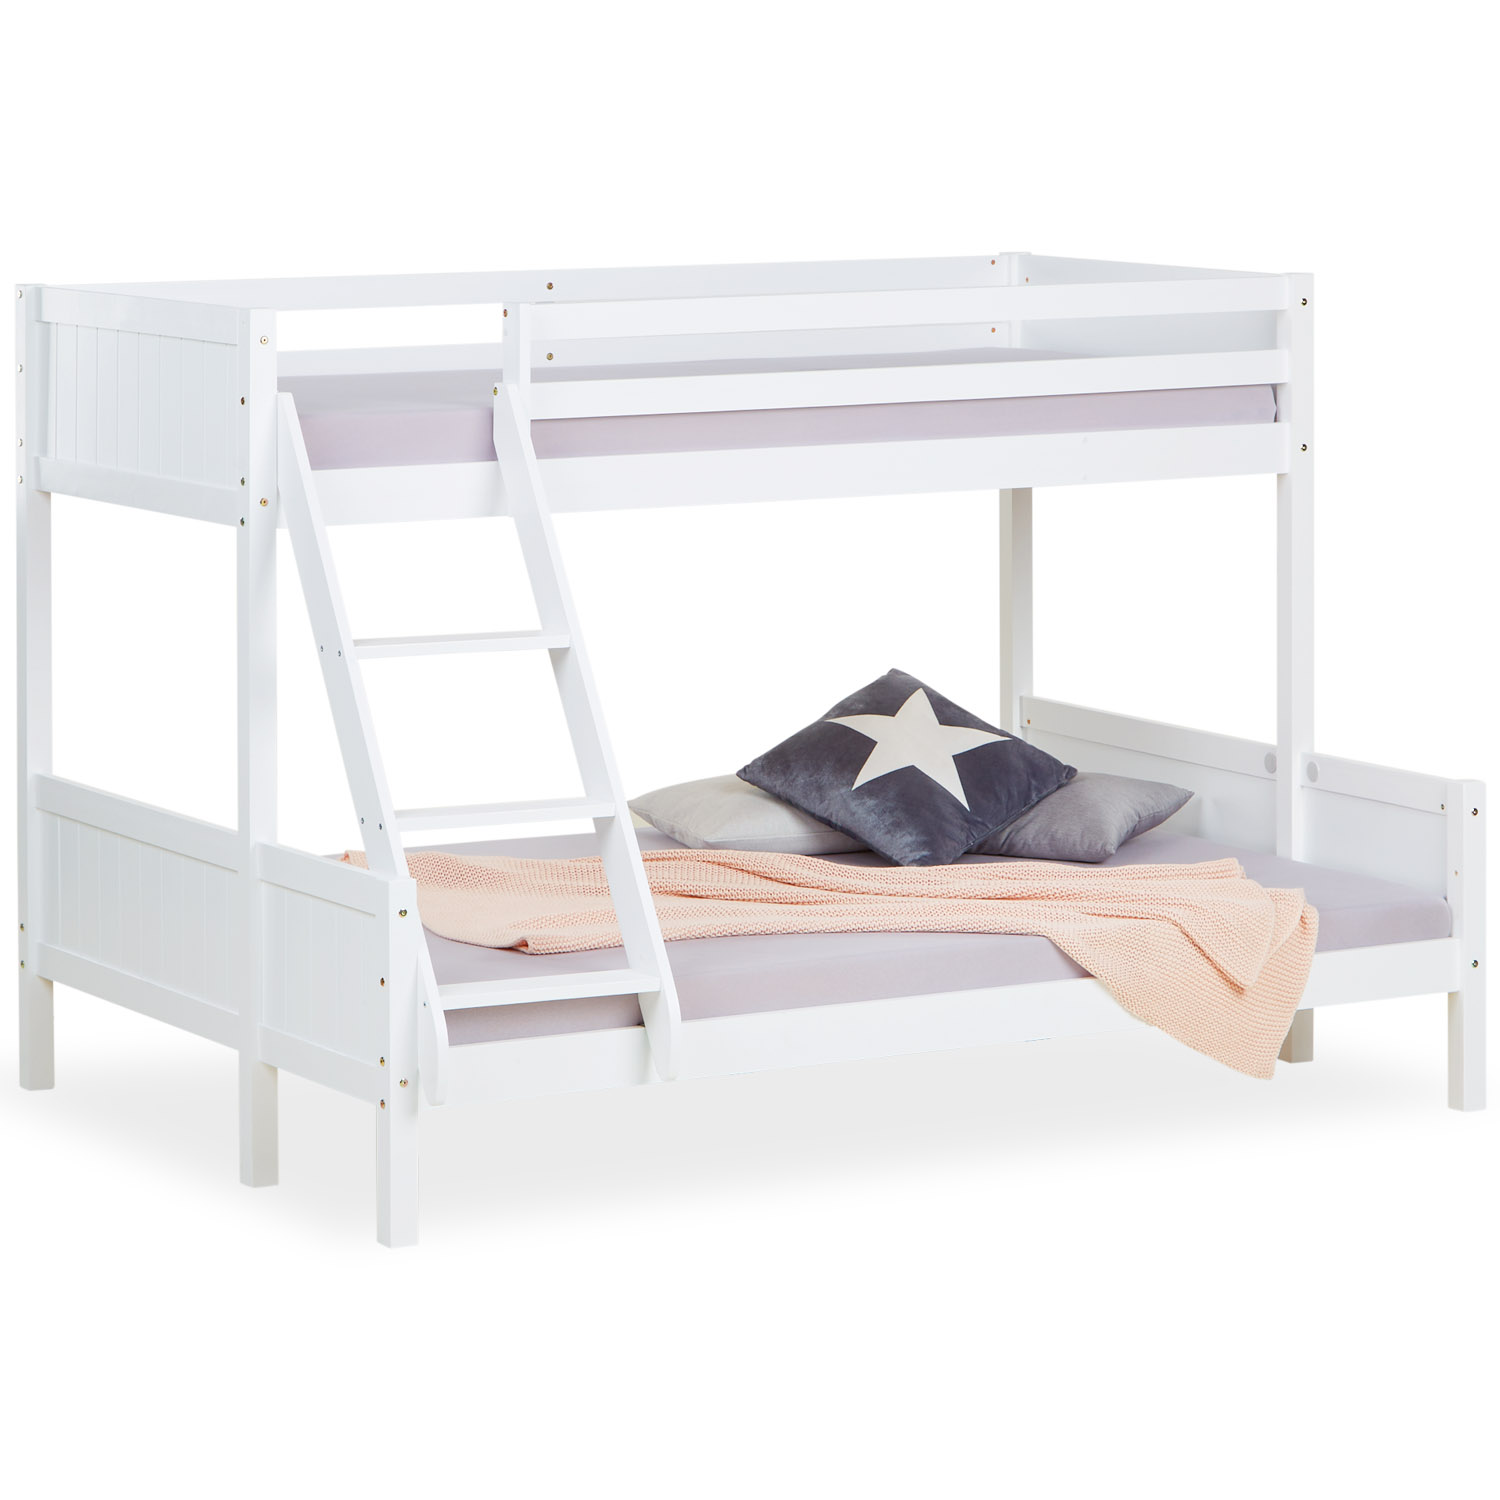 Children´s Bed Bunk Bed 90x200 and 140x200 High Sleeper Cot White Wood